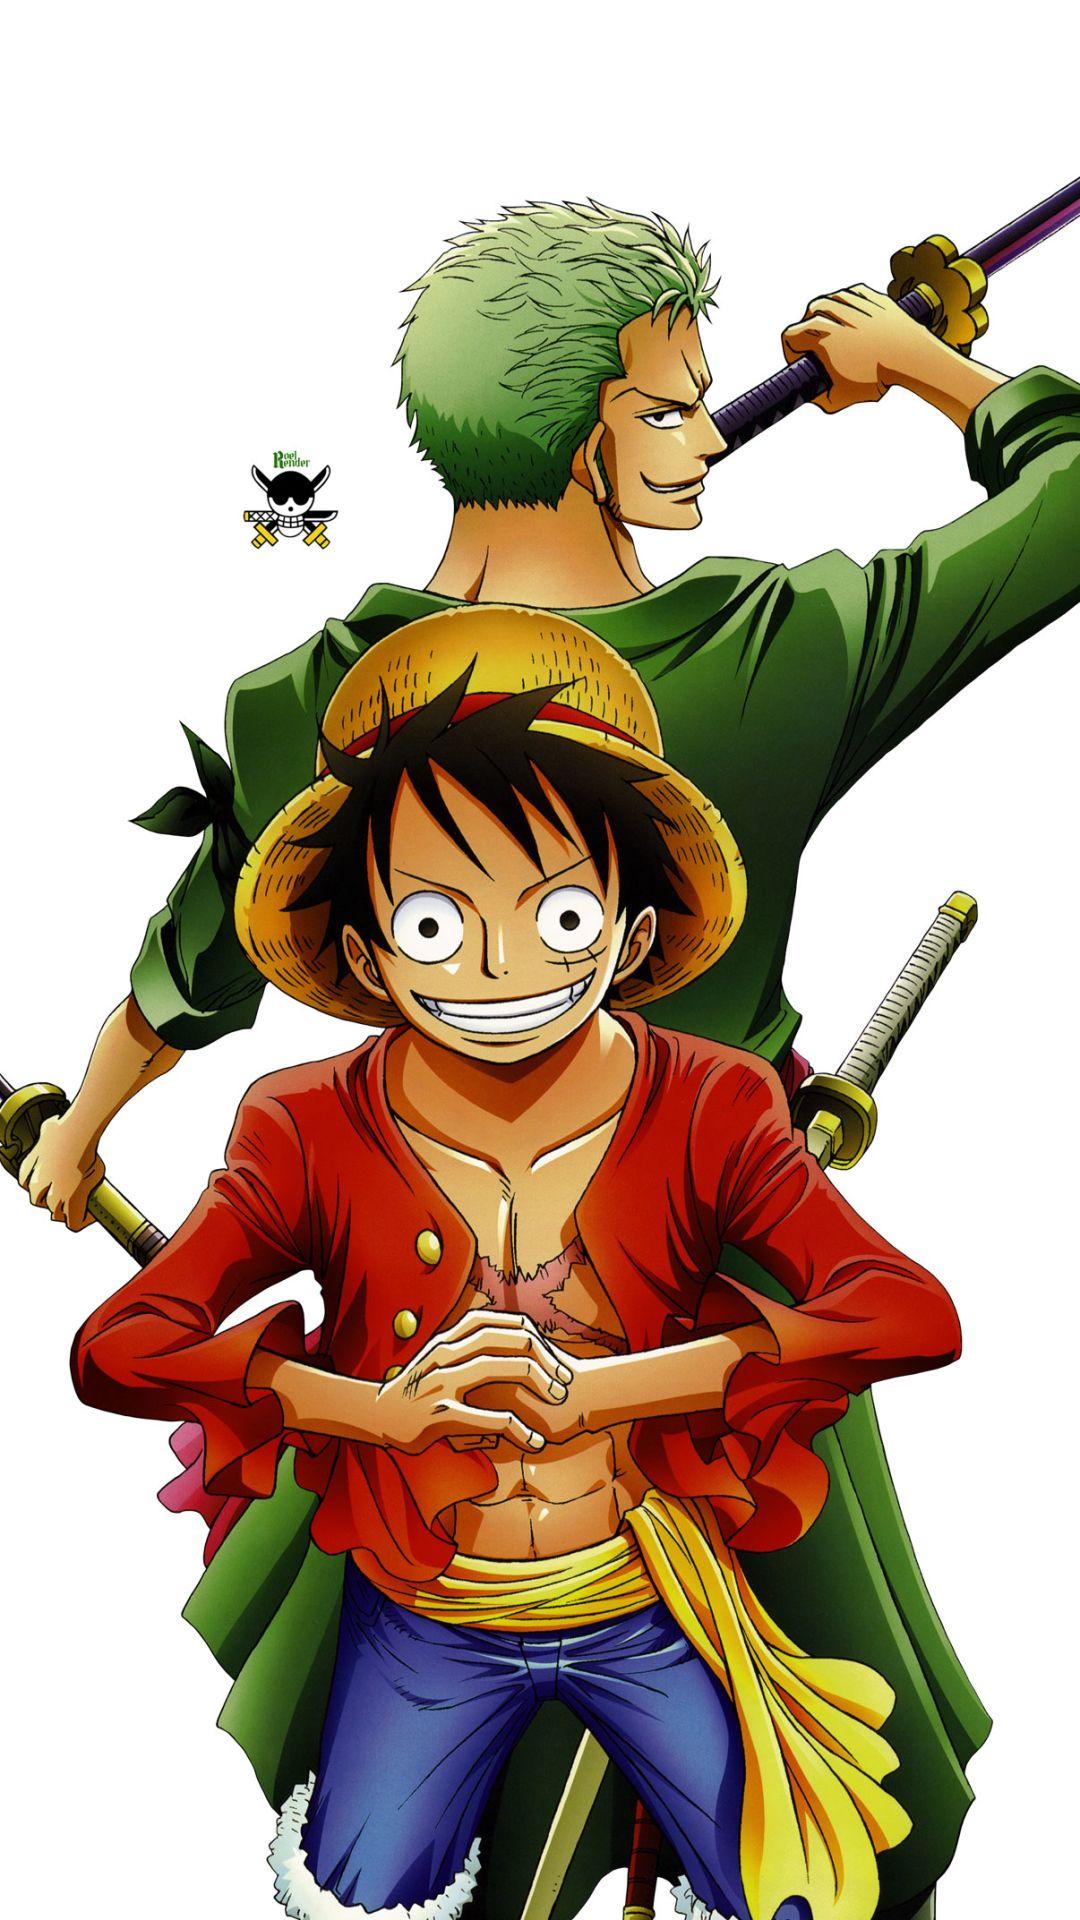  Wallpaper  Anime  Android  One  Piece  Bakaninime